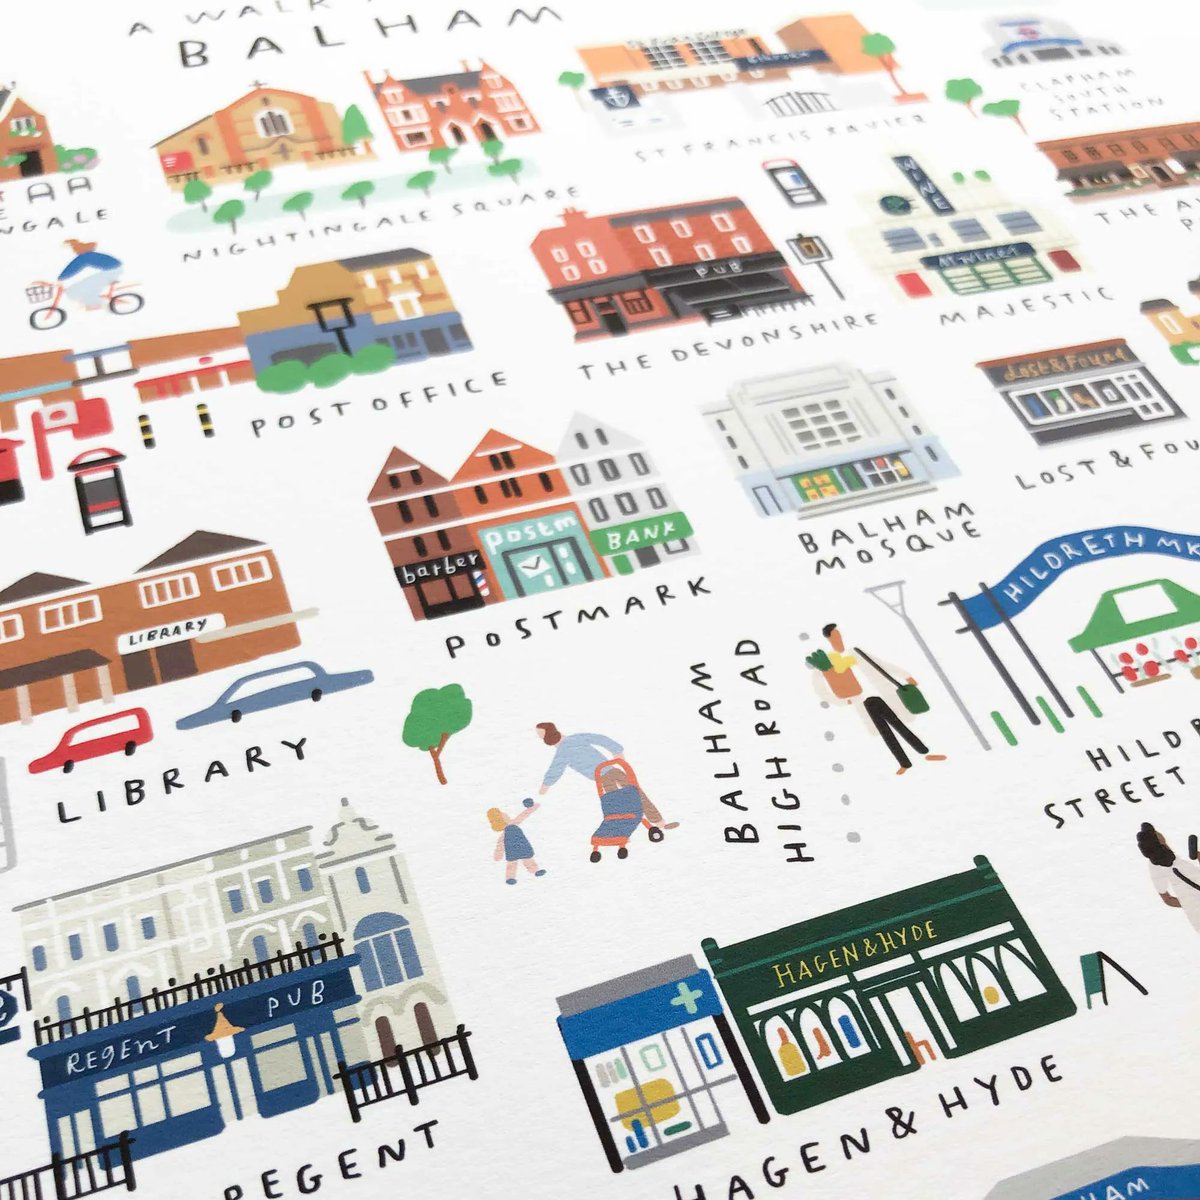 Home to around 15,000 people, #Balham benefits from its own tube and rail stations as well as a plethora of shops and restaurants. Our 'Walk Around Balham' illustrated map would make the perfect pressie for Balham residents past or present buff.ly/3cney65